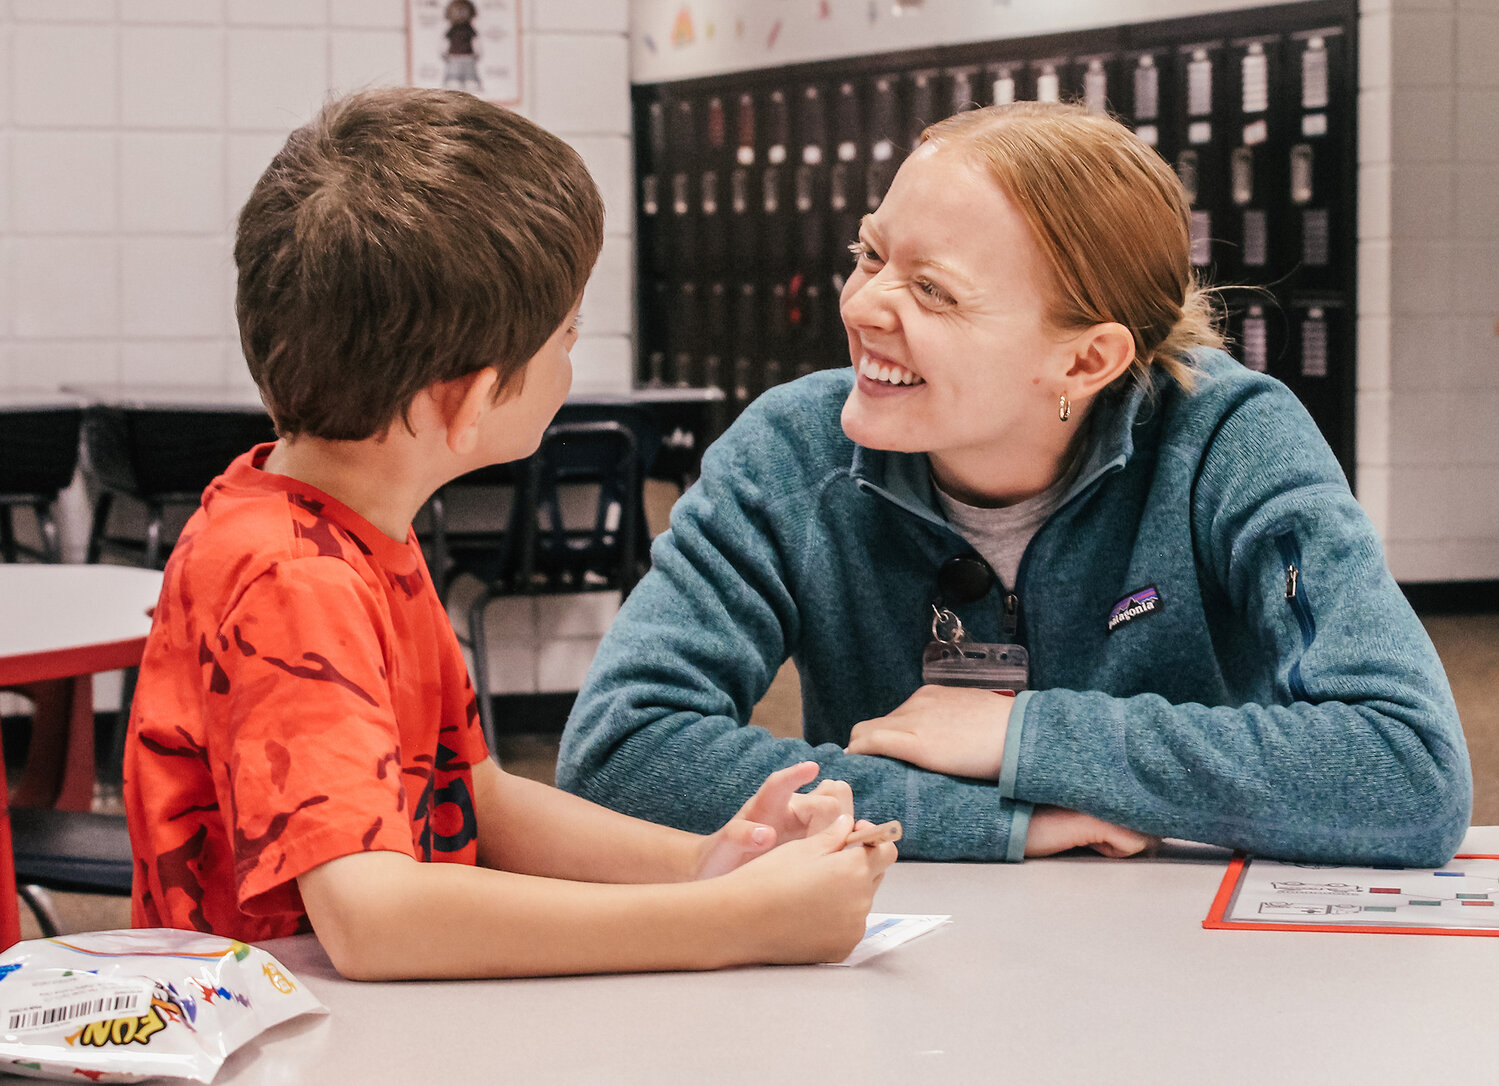 Holly Forrester, an Occupational Therapy Intern from the University of South Dakota, works with a local student as part of a Great Prairie Area Education Agency intership program.